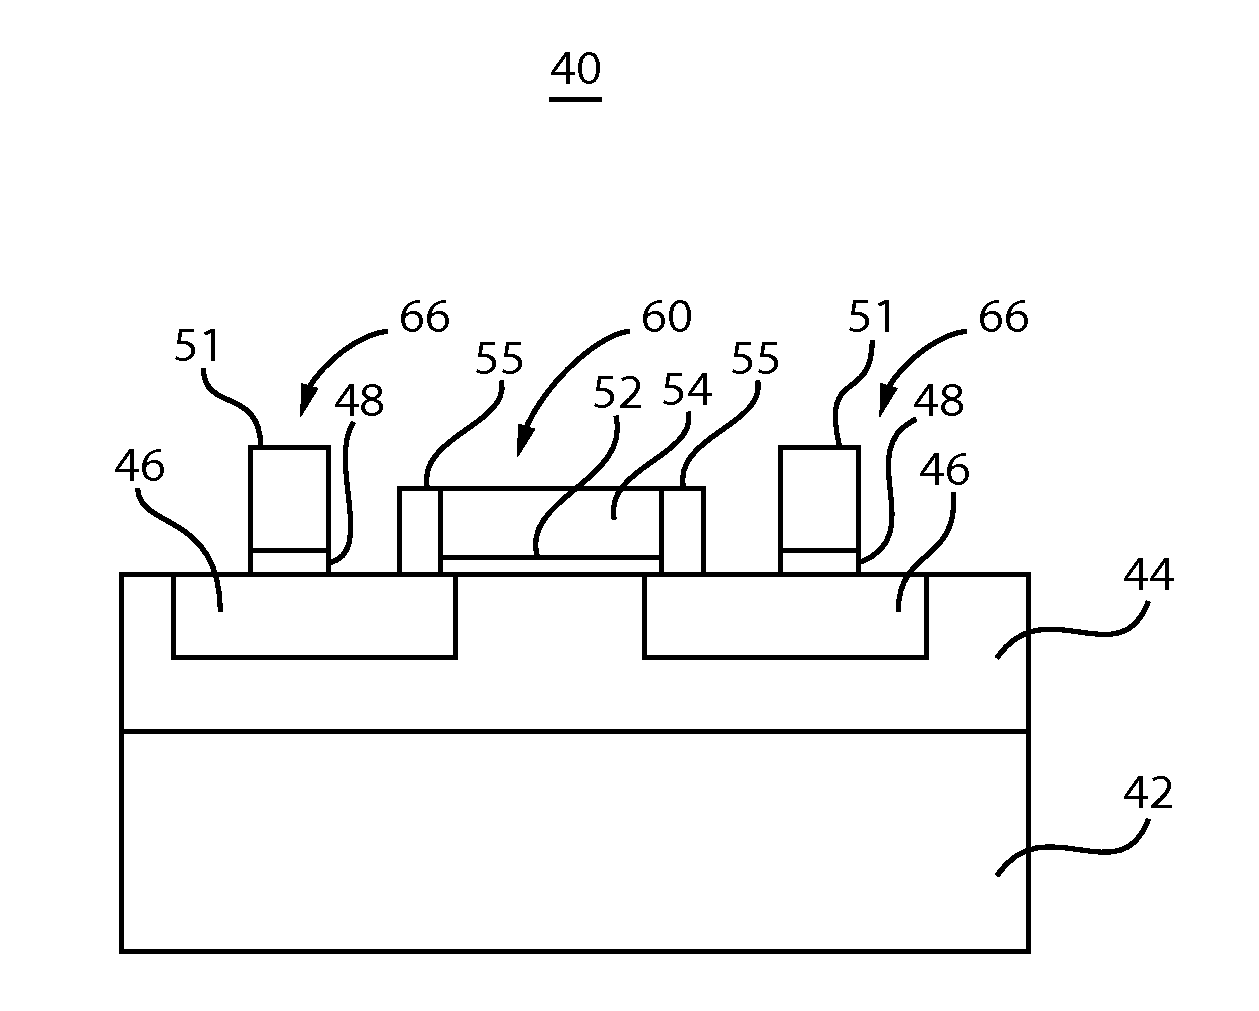 Low resistance contact for semiconductor devices